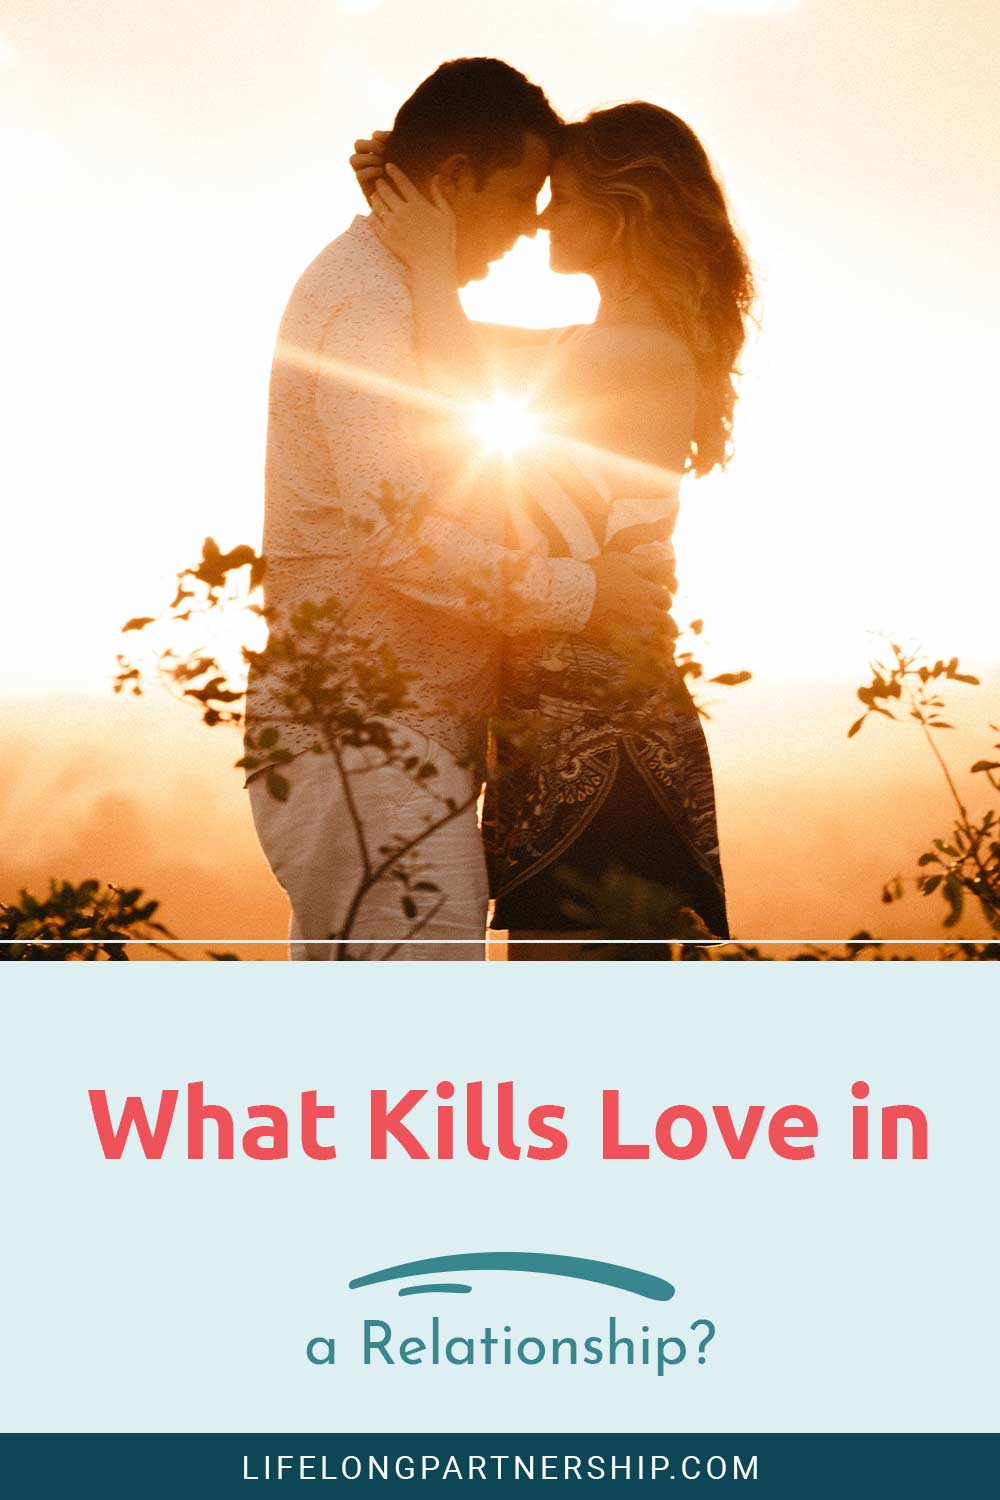 What Kills Love in a Relationship?